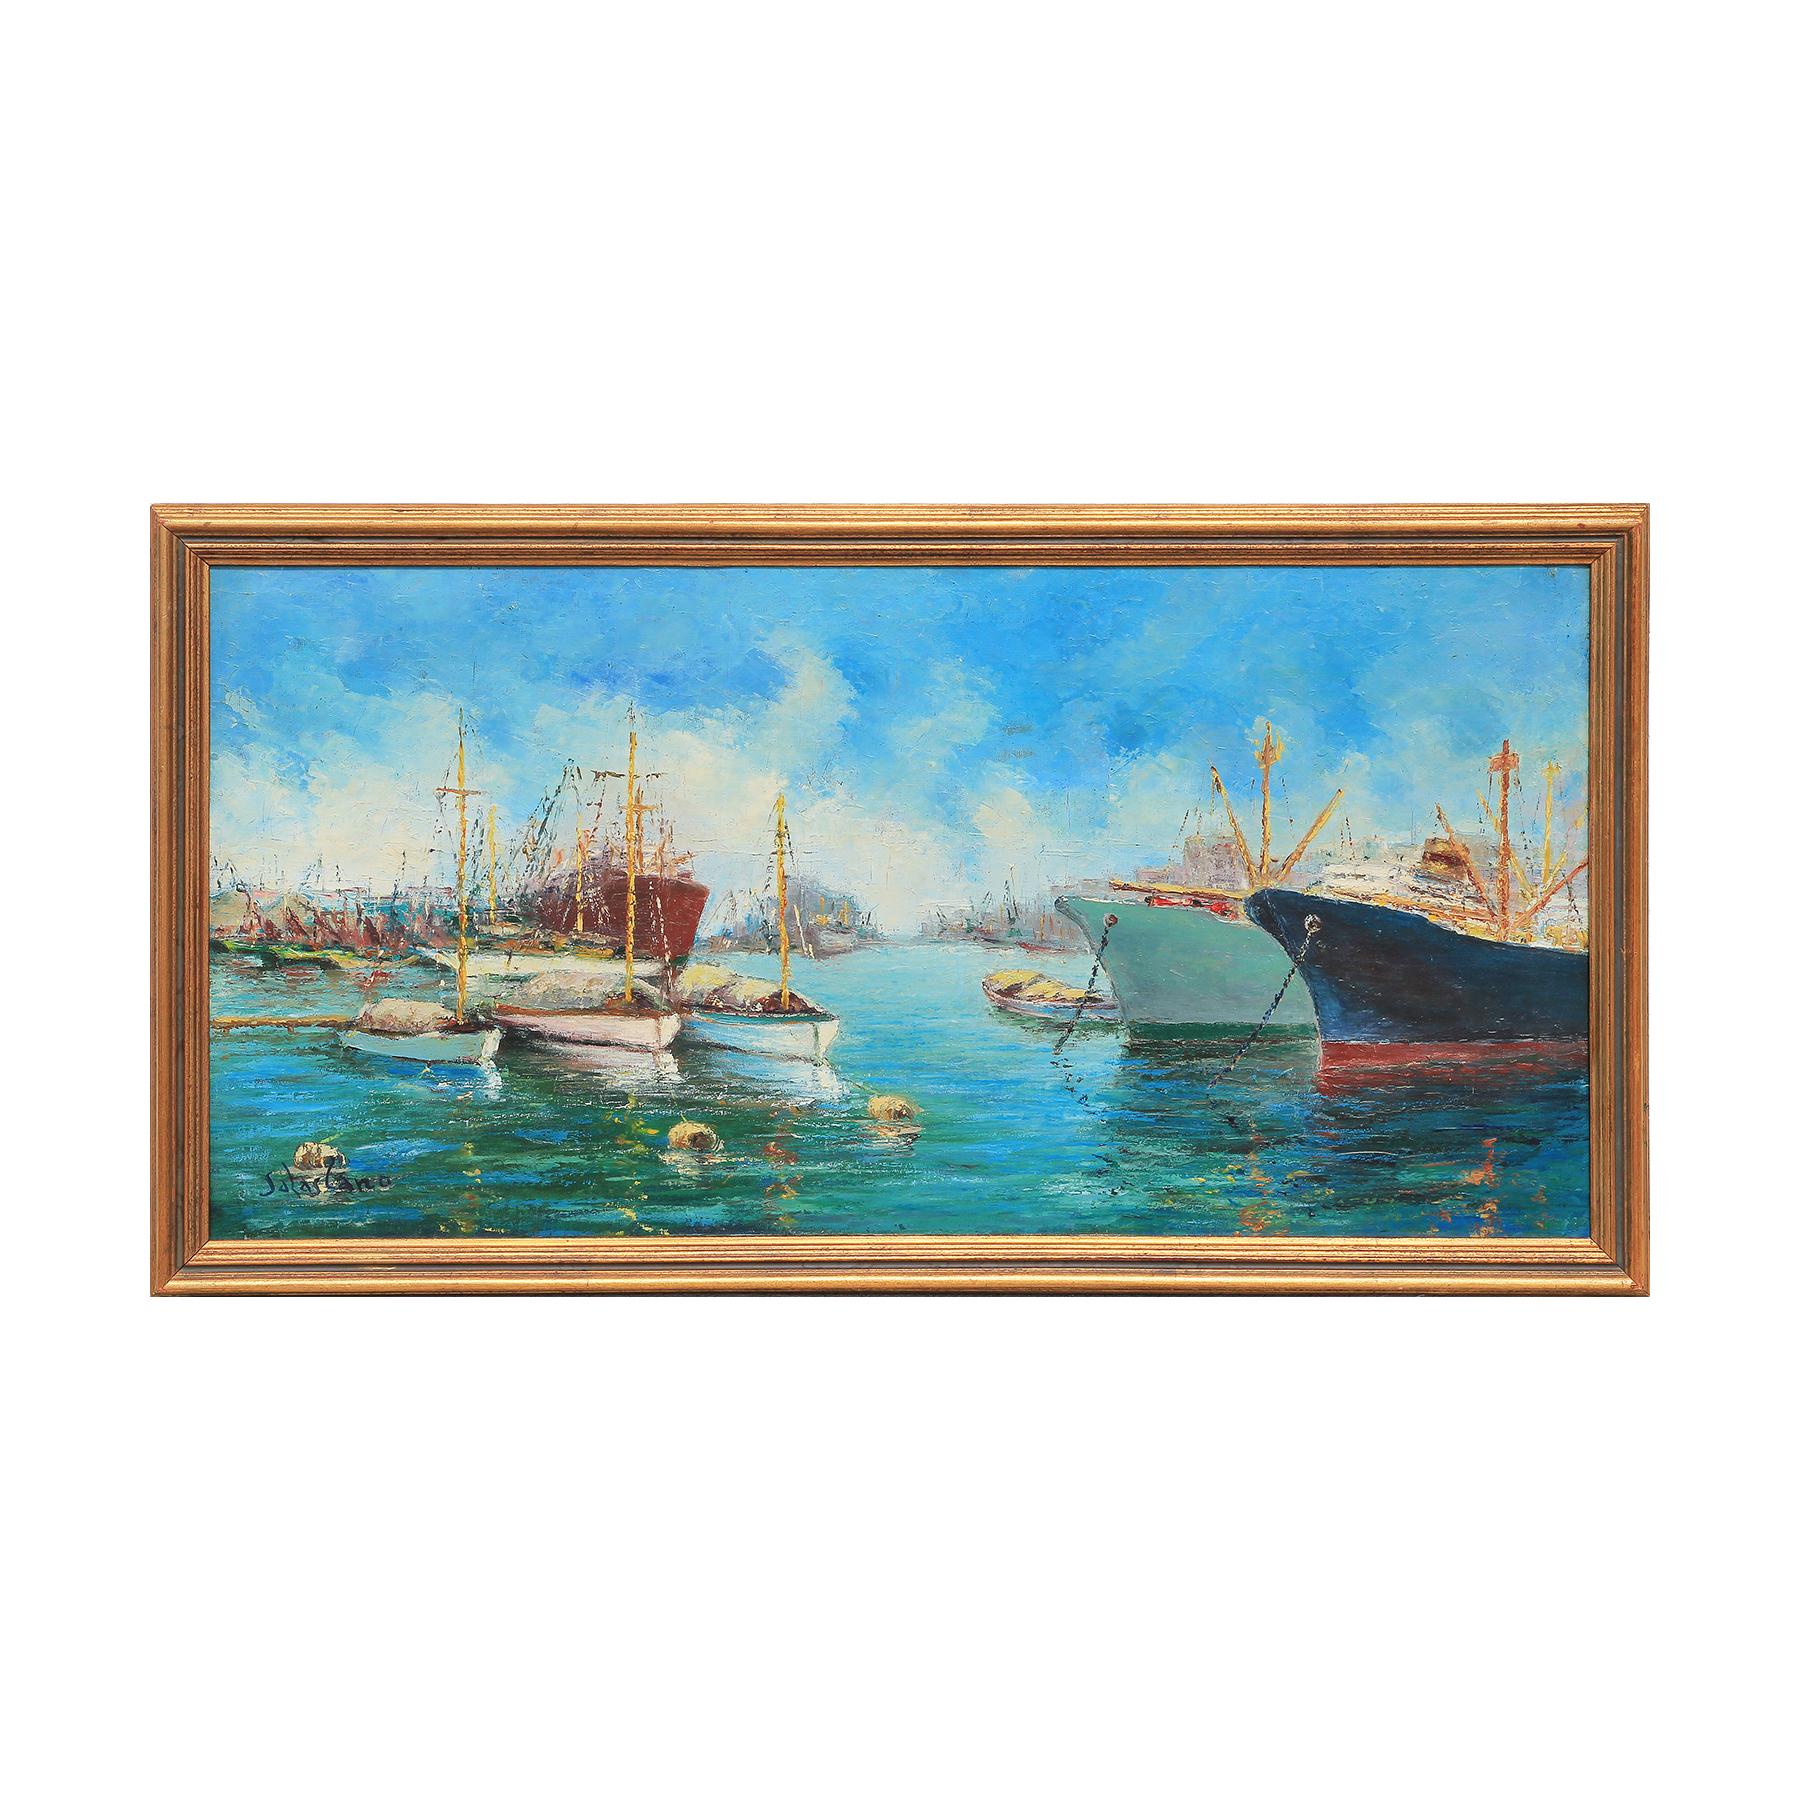 Impressionism oil PAINTING sailboat boat dock landscape small vintage hand painted original c1970s  art home decor  by Cruz